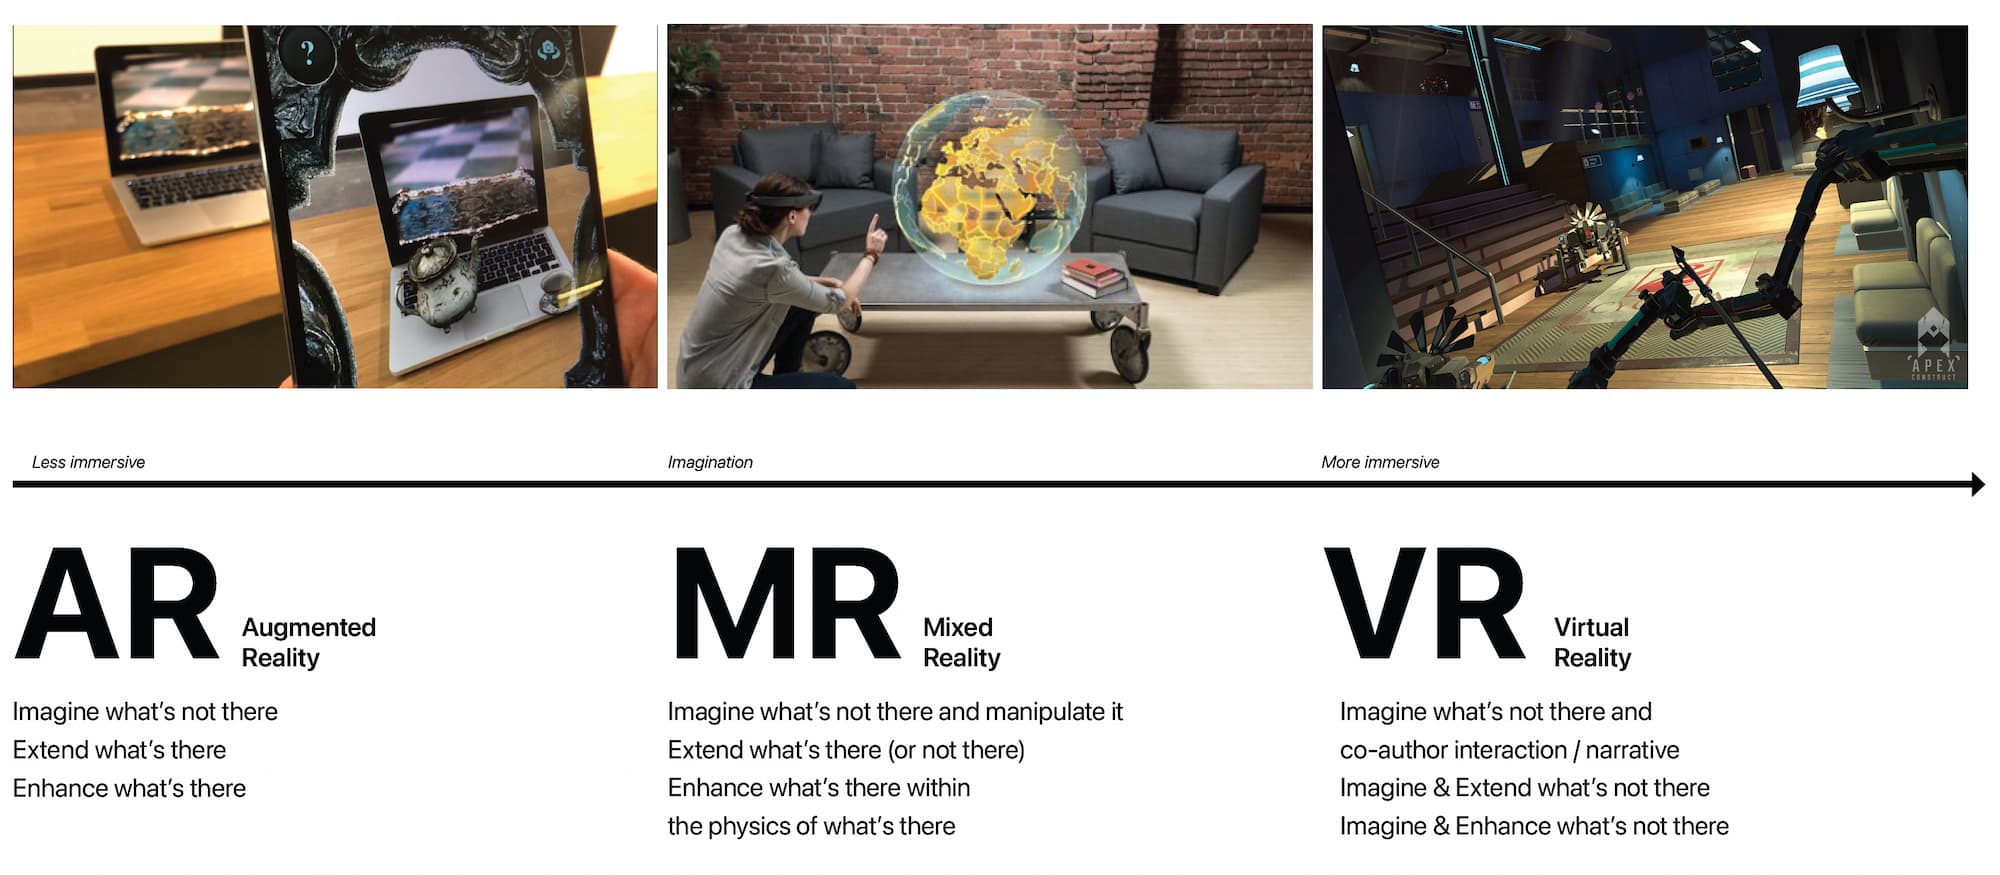 Differences between AR, MR and VR (taken from lecture notes. Pictures from Apex, microsoft)